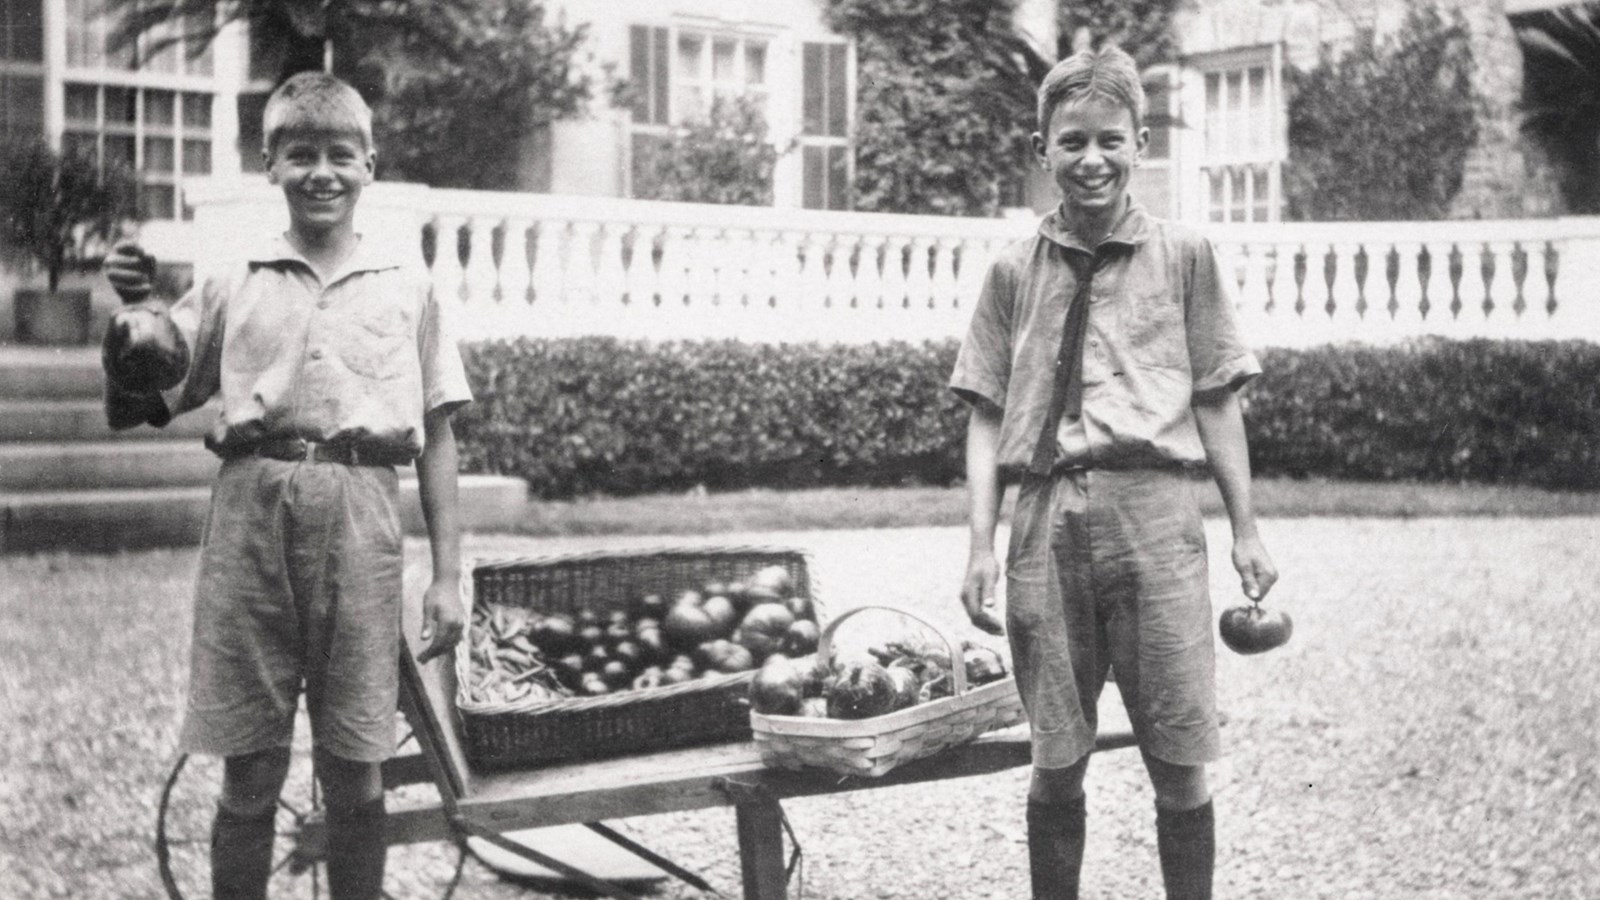 Two boys stand near a cart hold produce from a garden.